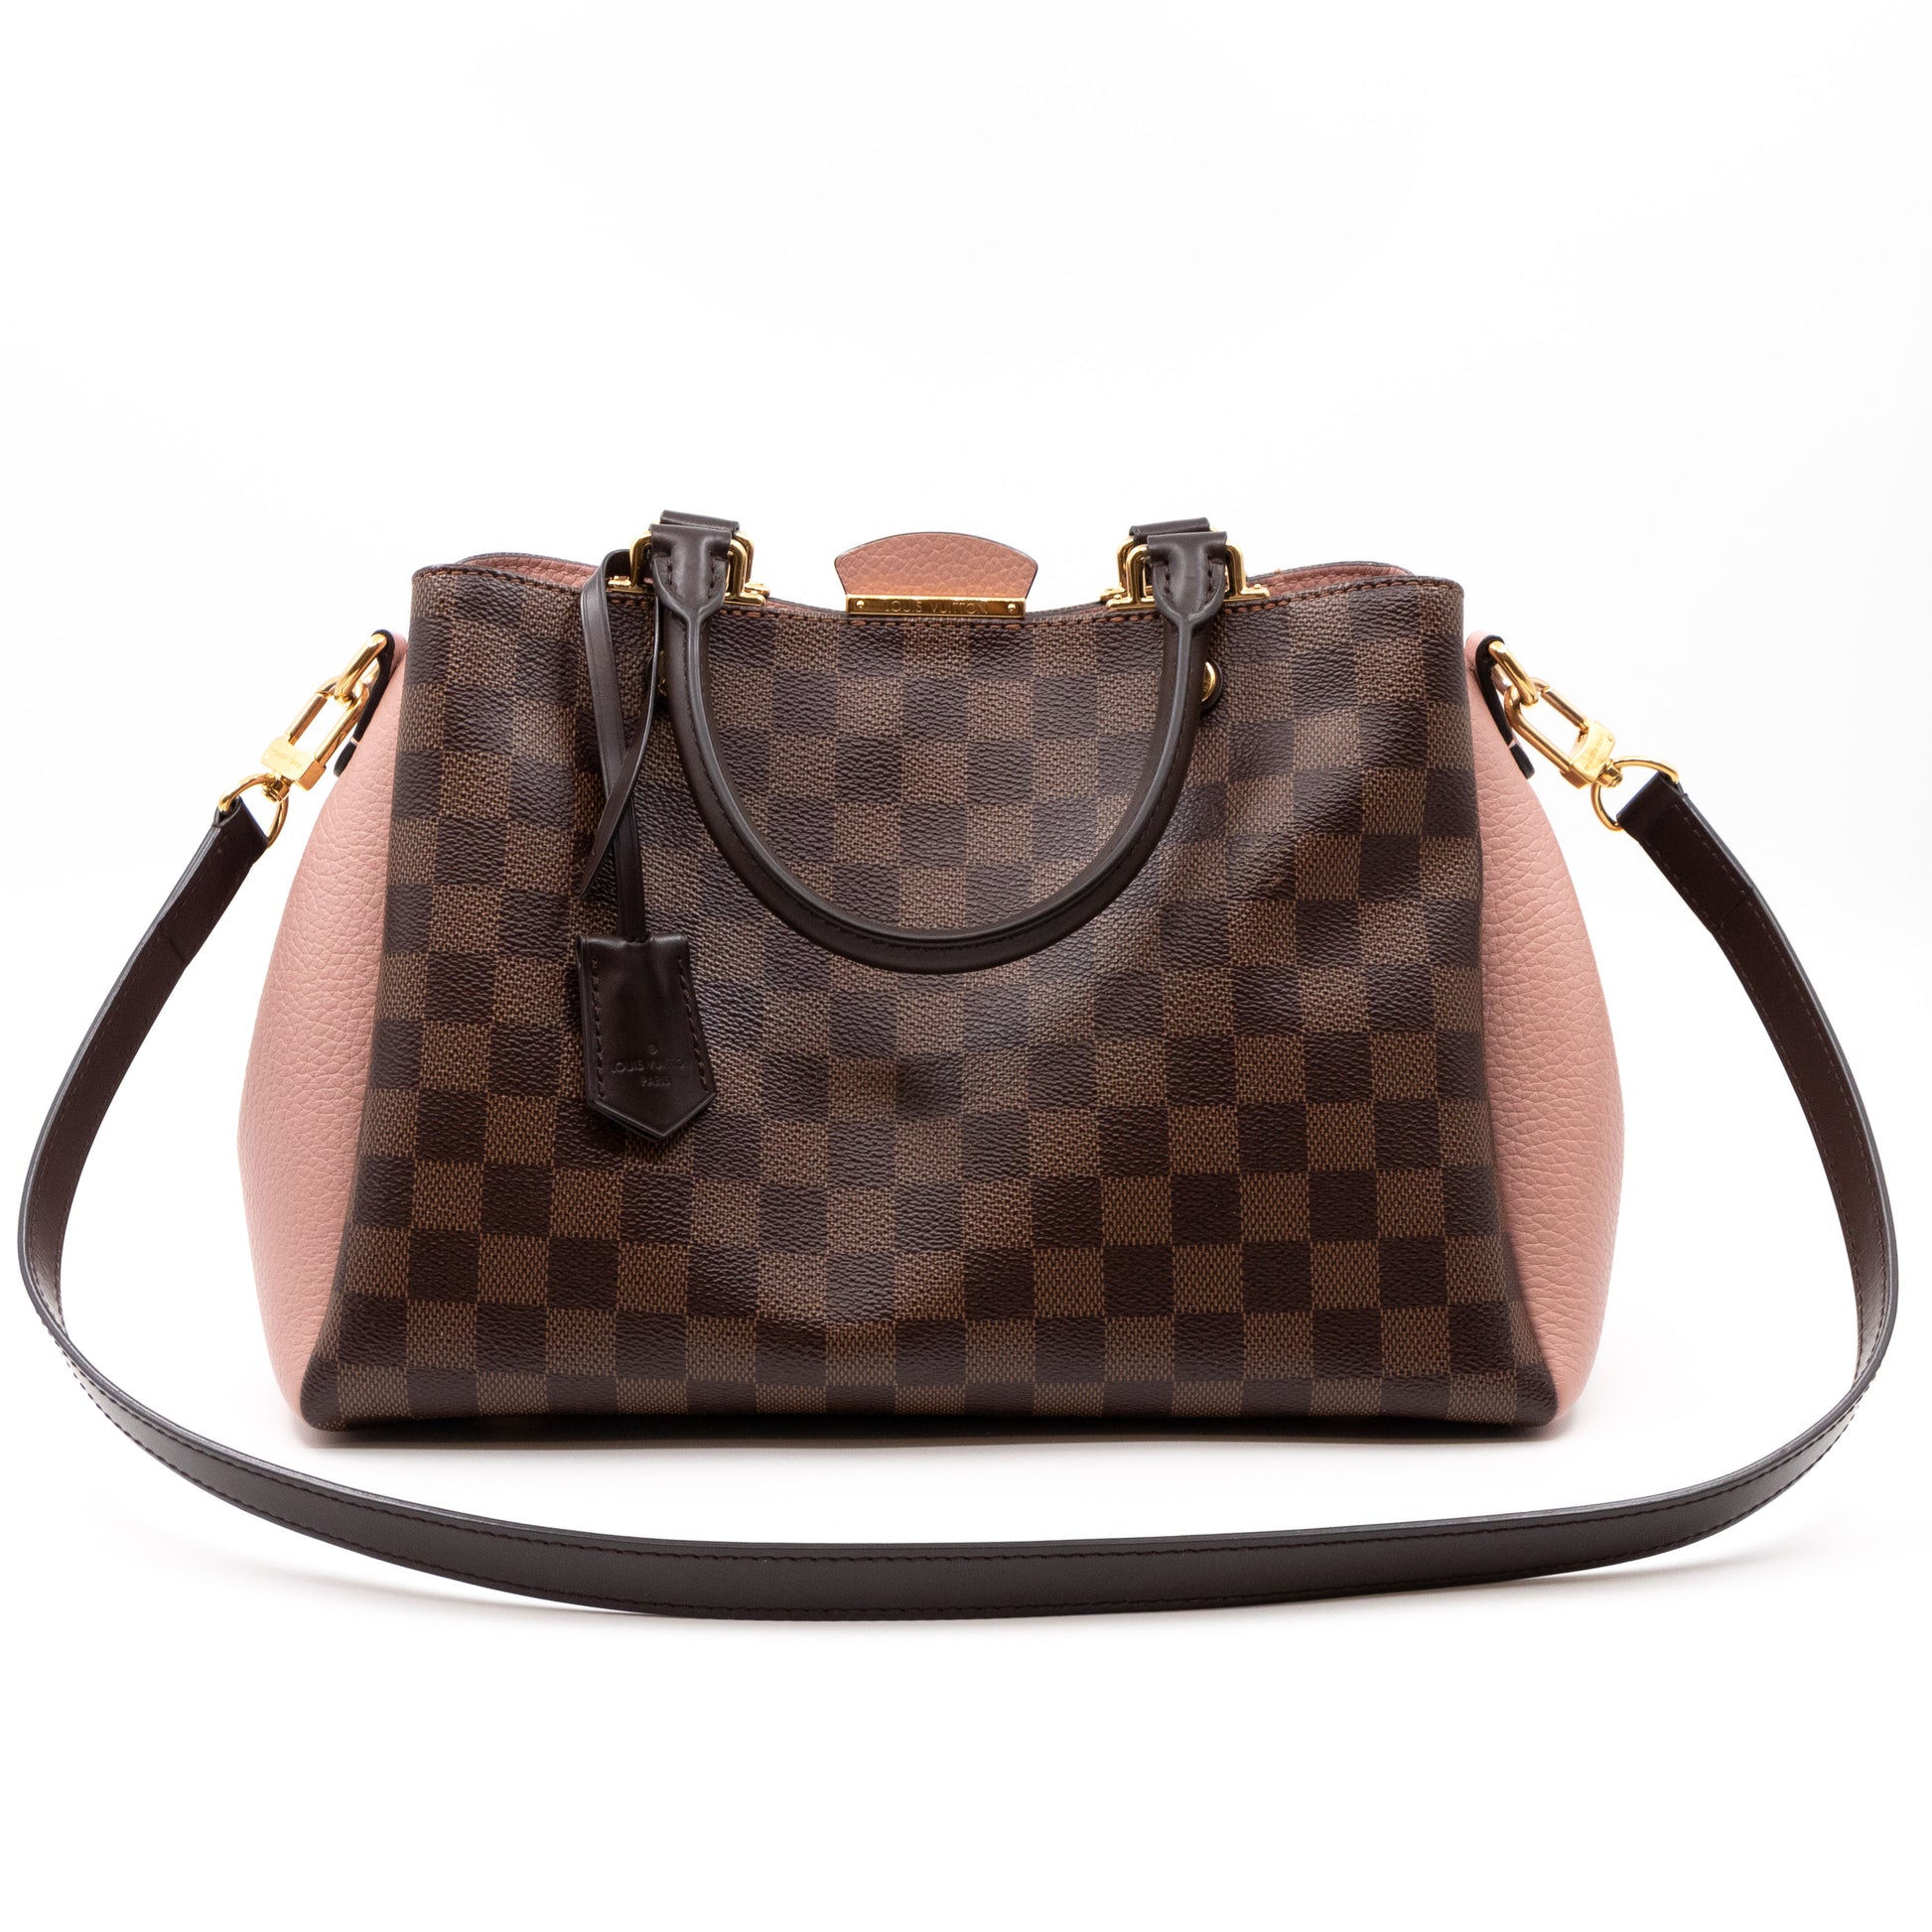 Louis Vuitton Brittany Bag Reviewed